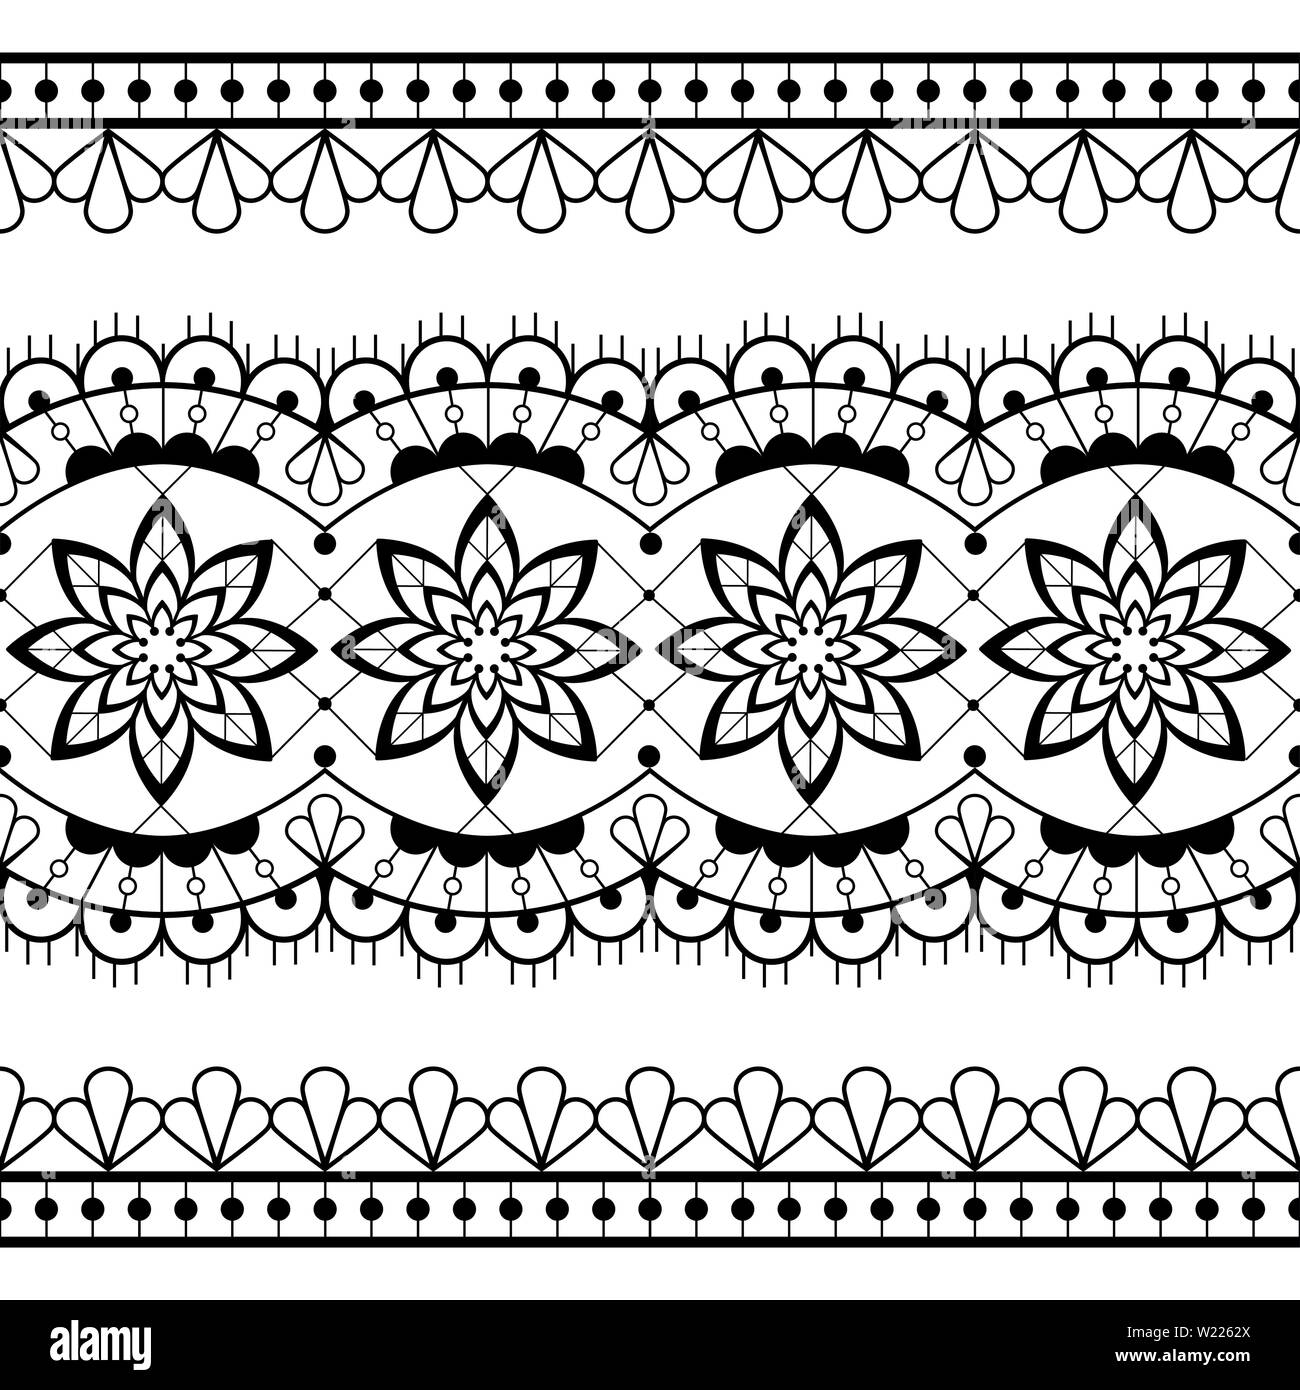 Seamless white lace Royalty Free Vector Image - VectorStock, White Lace 